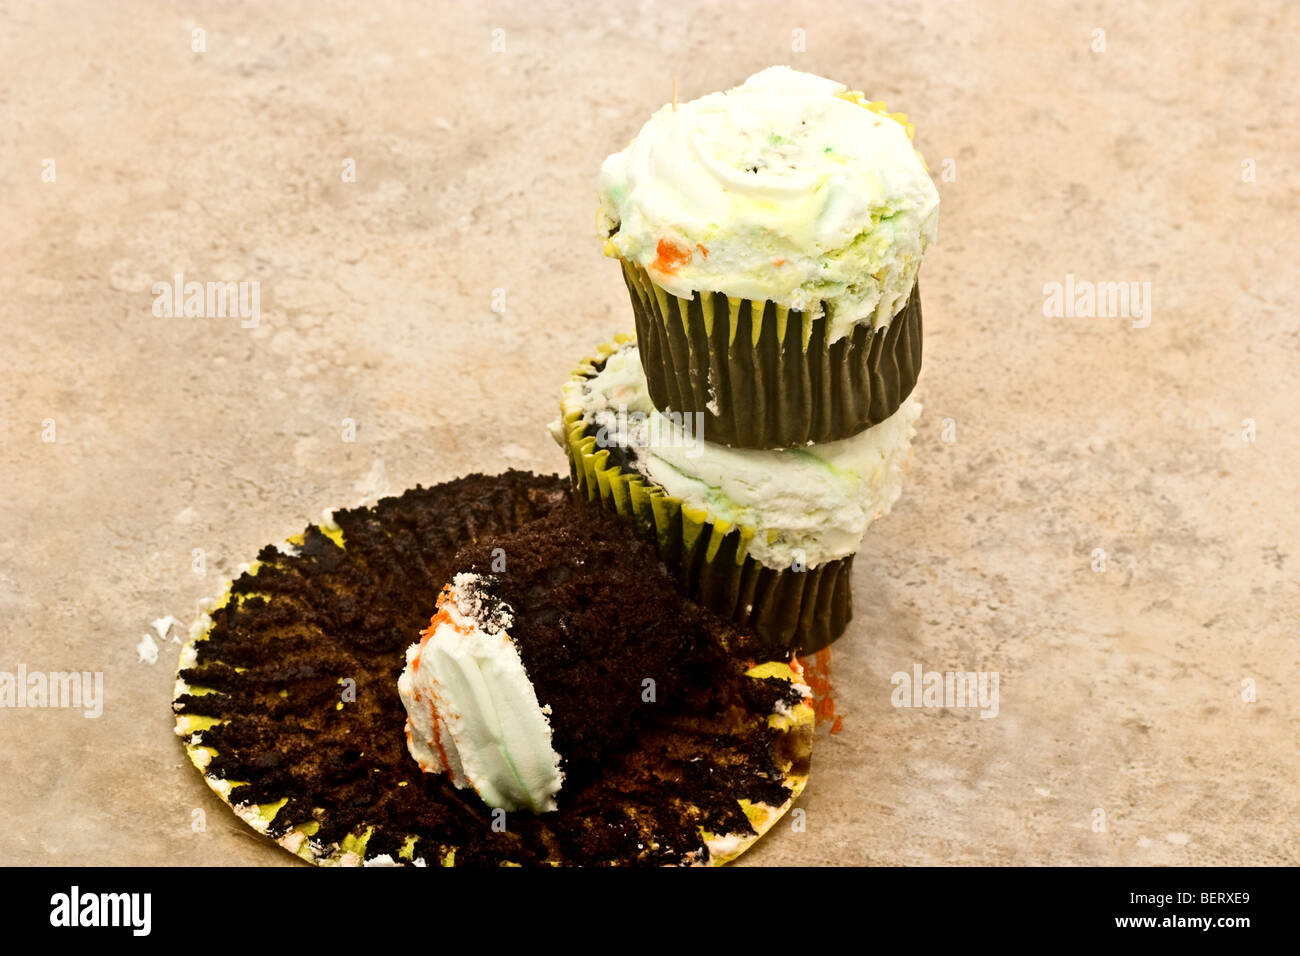 Pile of two chocolate cupcakes, with a third almost eaten Stock Photo